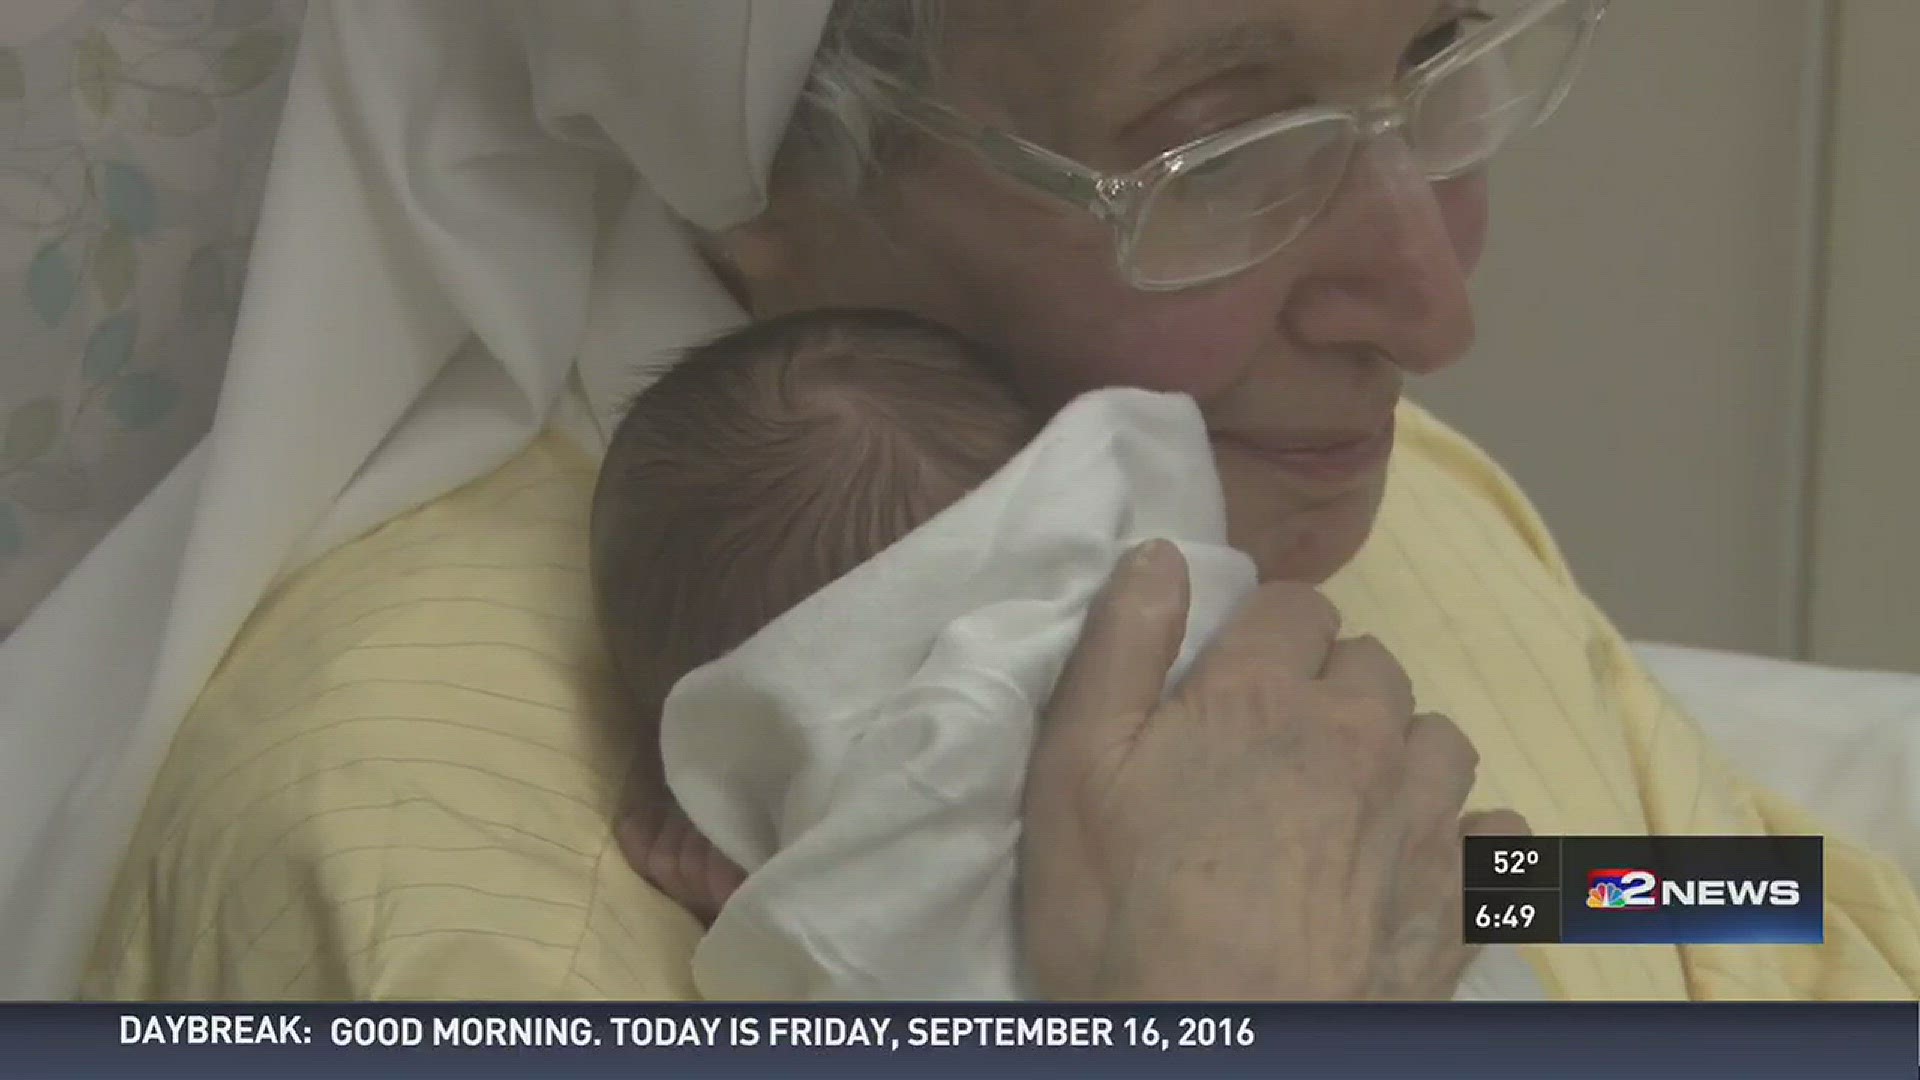 Baby Sister Crying Hd Videos - Meet 81-year-old Sister Francis, a NICU Baby Cuddler | 13newsnow.com